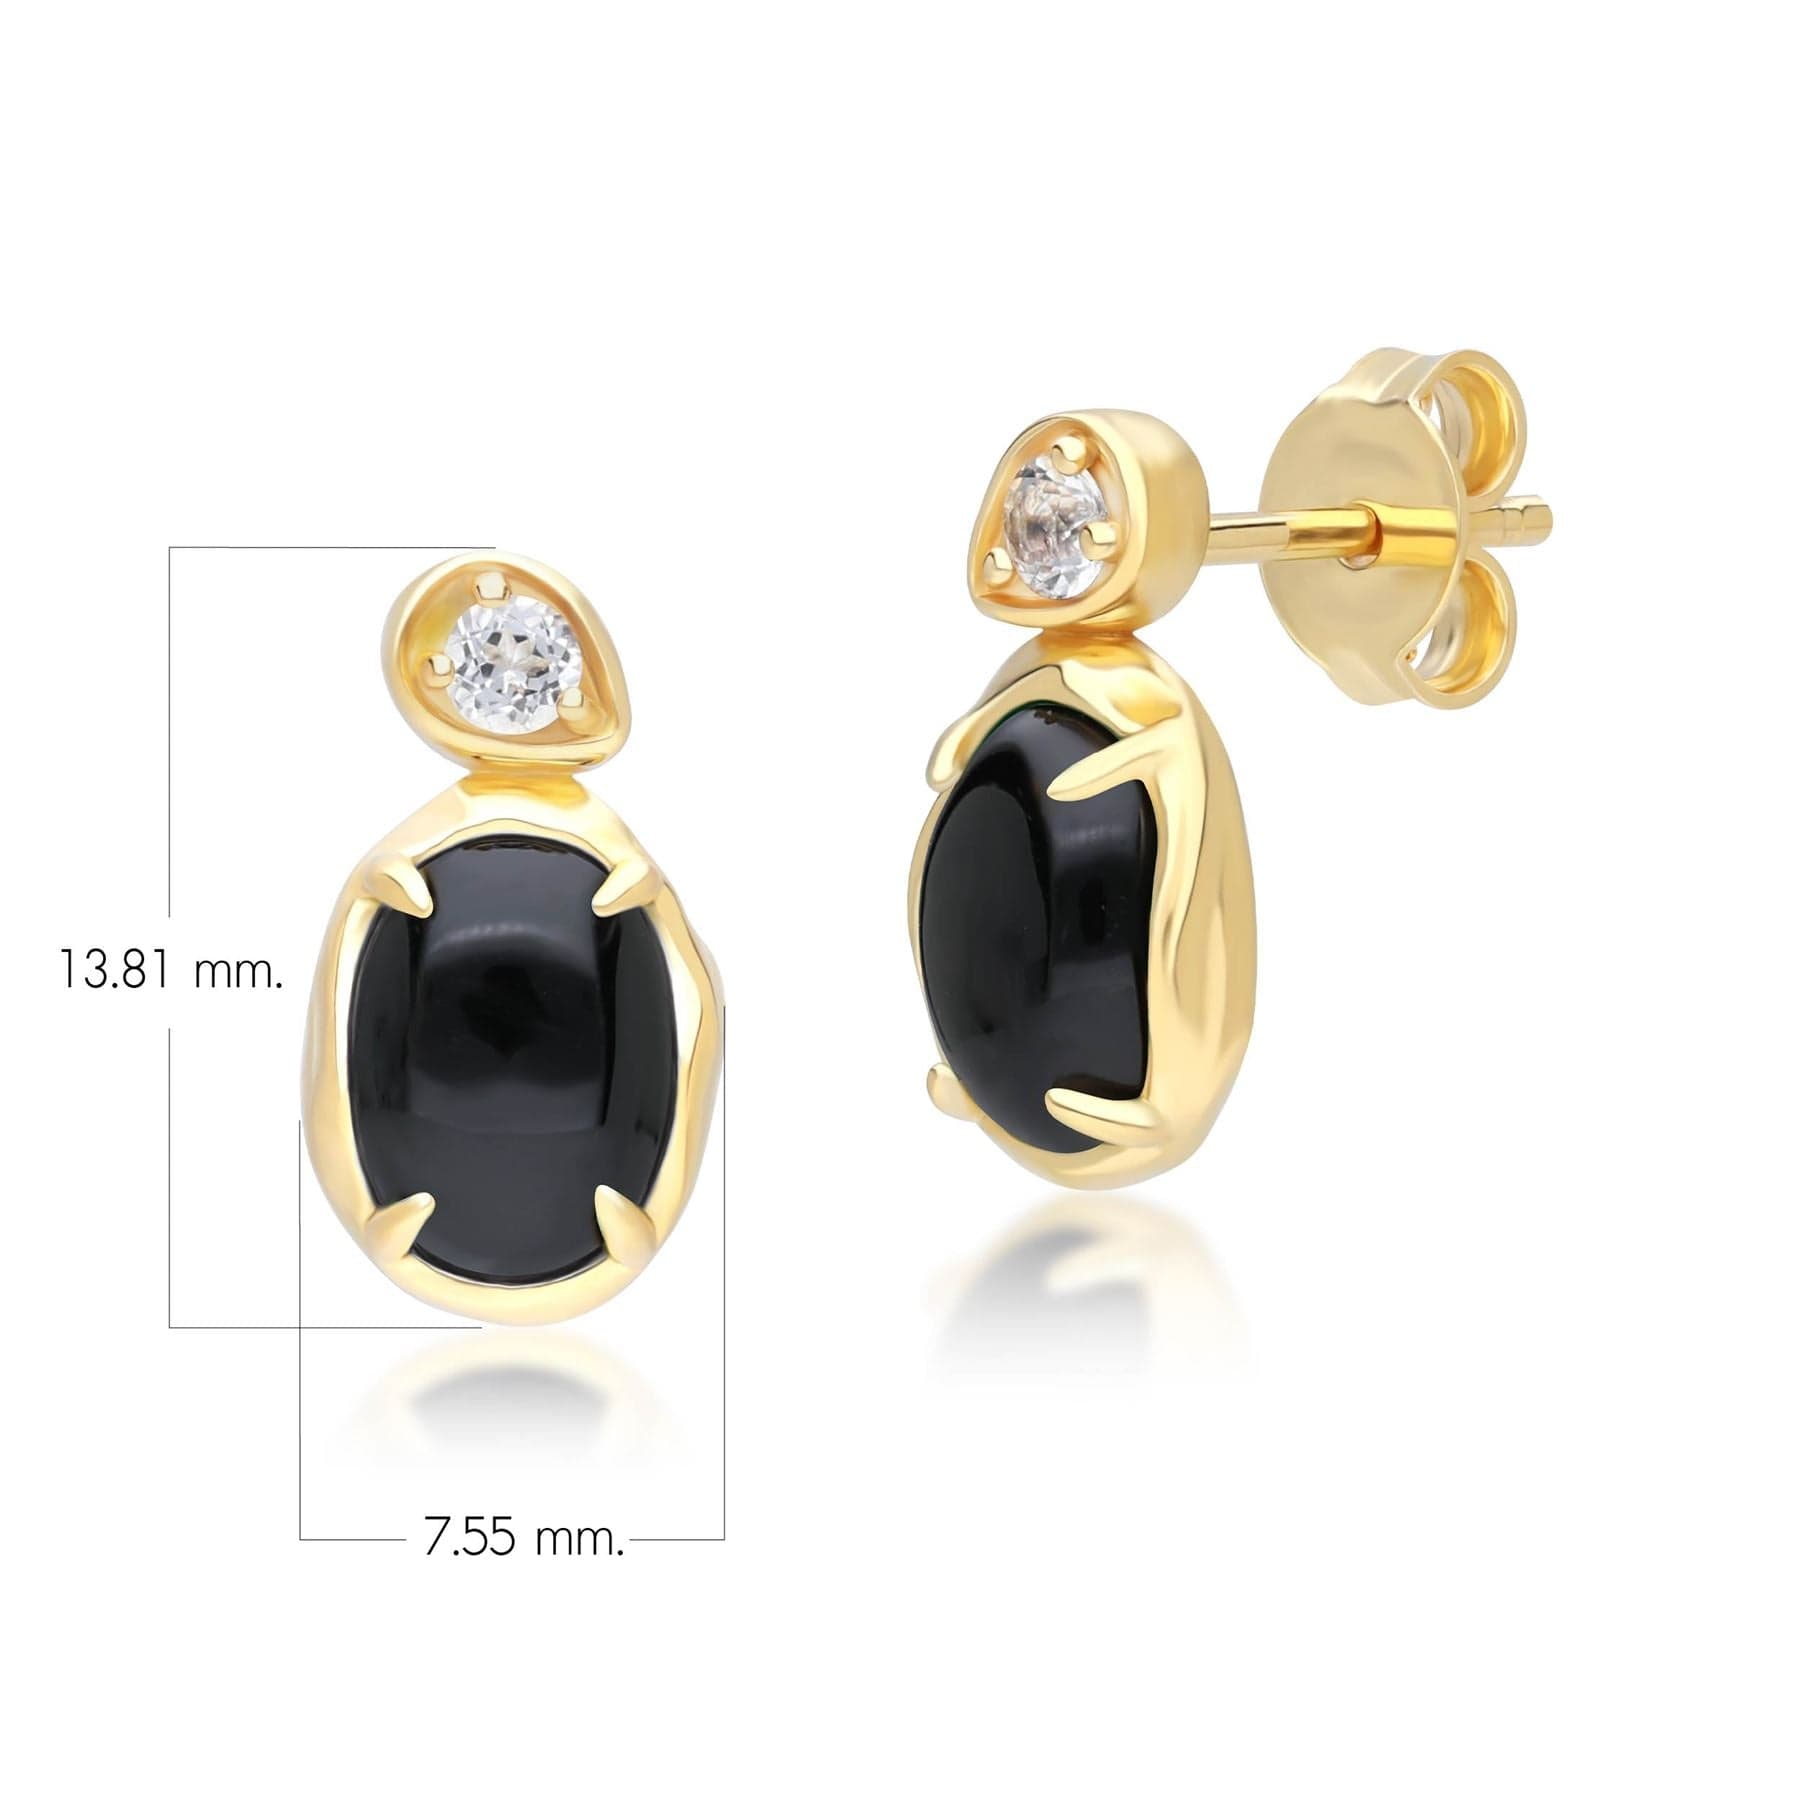 Irregular Oval Black Onyx & Topaz Drop Earrings In 18ct Gold Plated SterlIng Silver